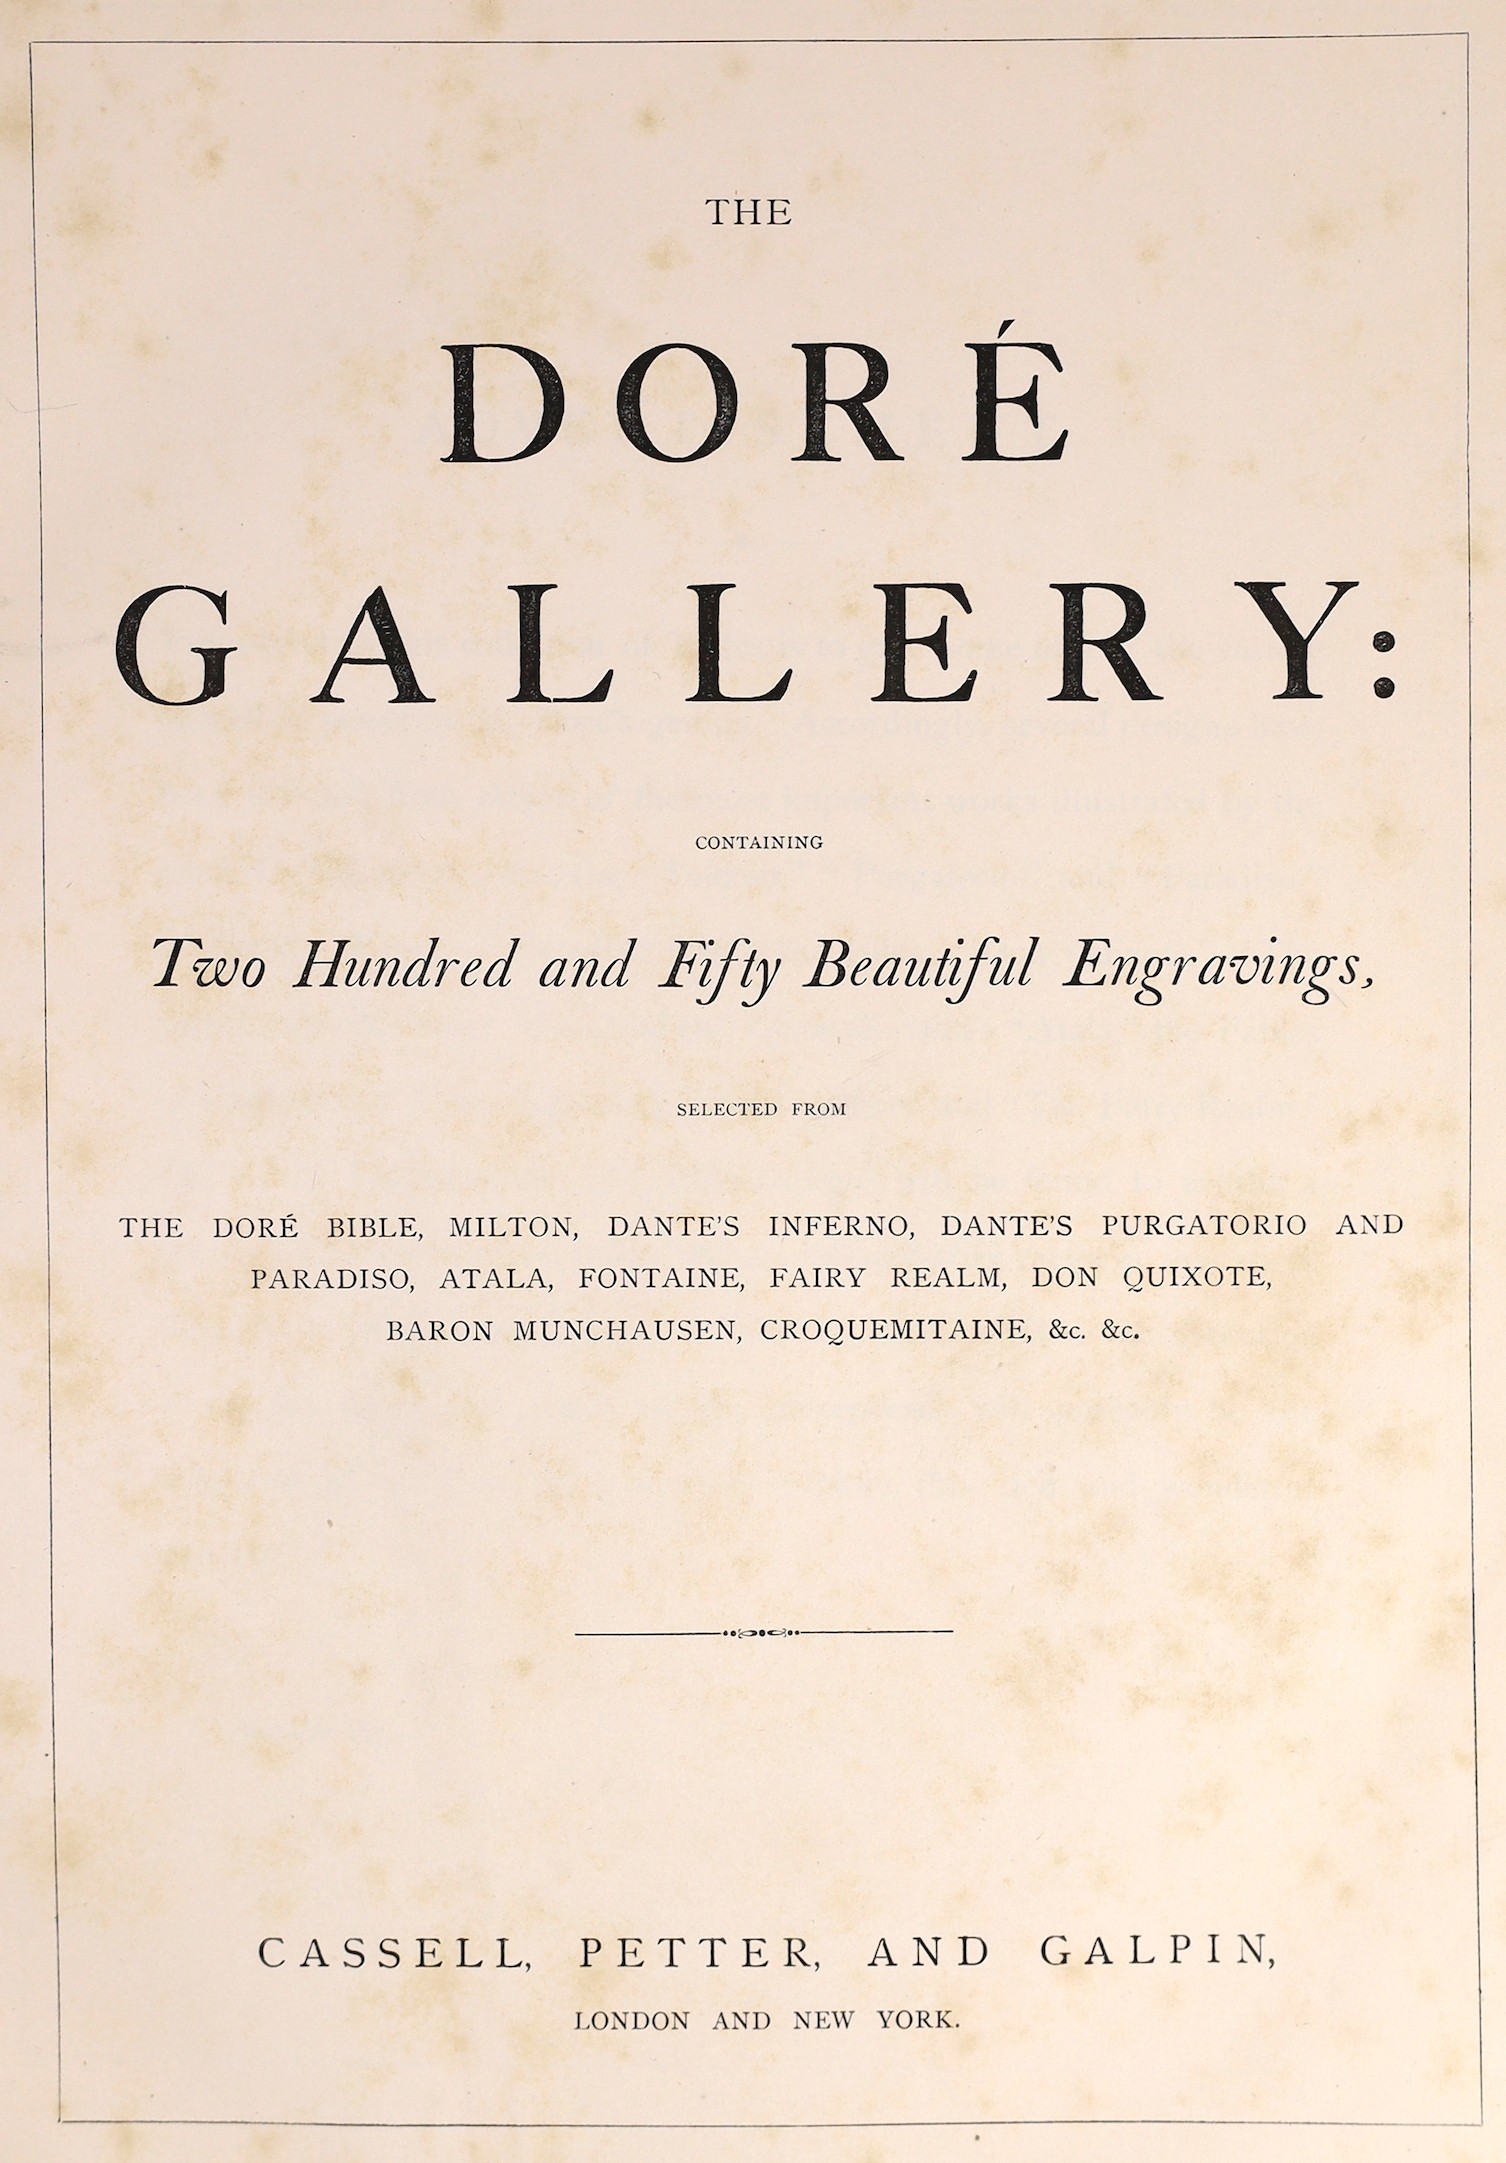 Dore, Gustave - The Dore Gallery, 2 vols, folio, black leather gilt, Cassell, Petter, and Galpin, London and New York, c. 1890